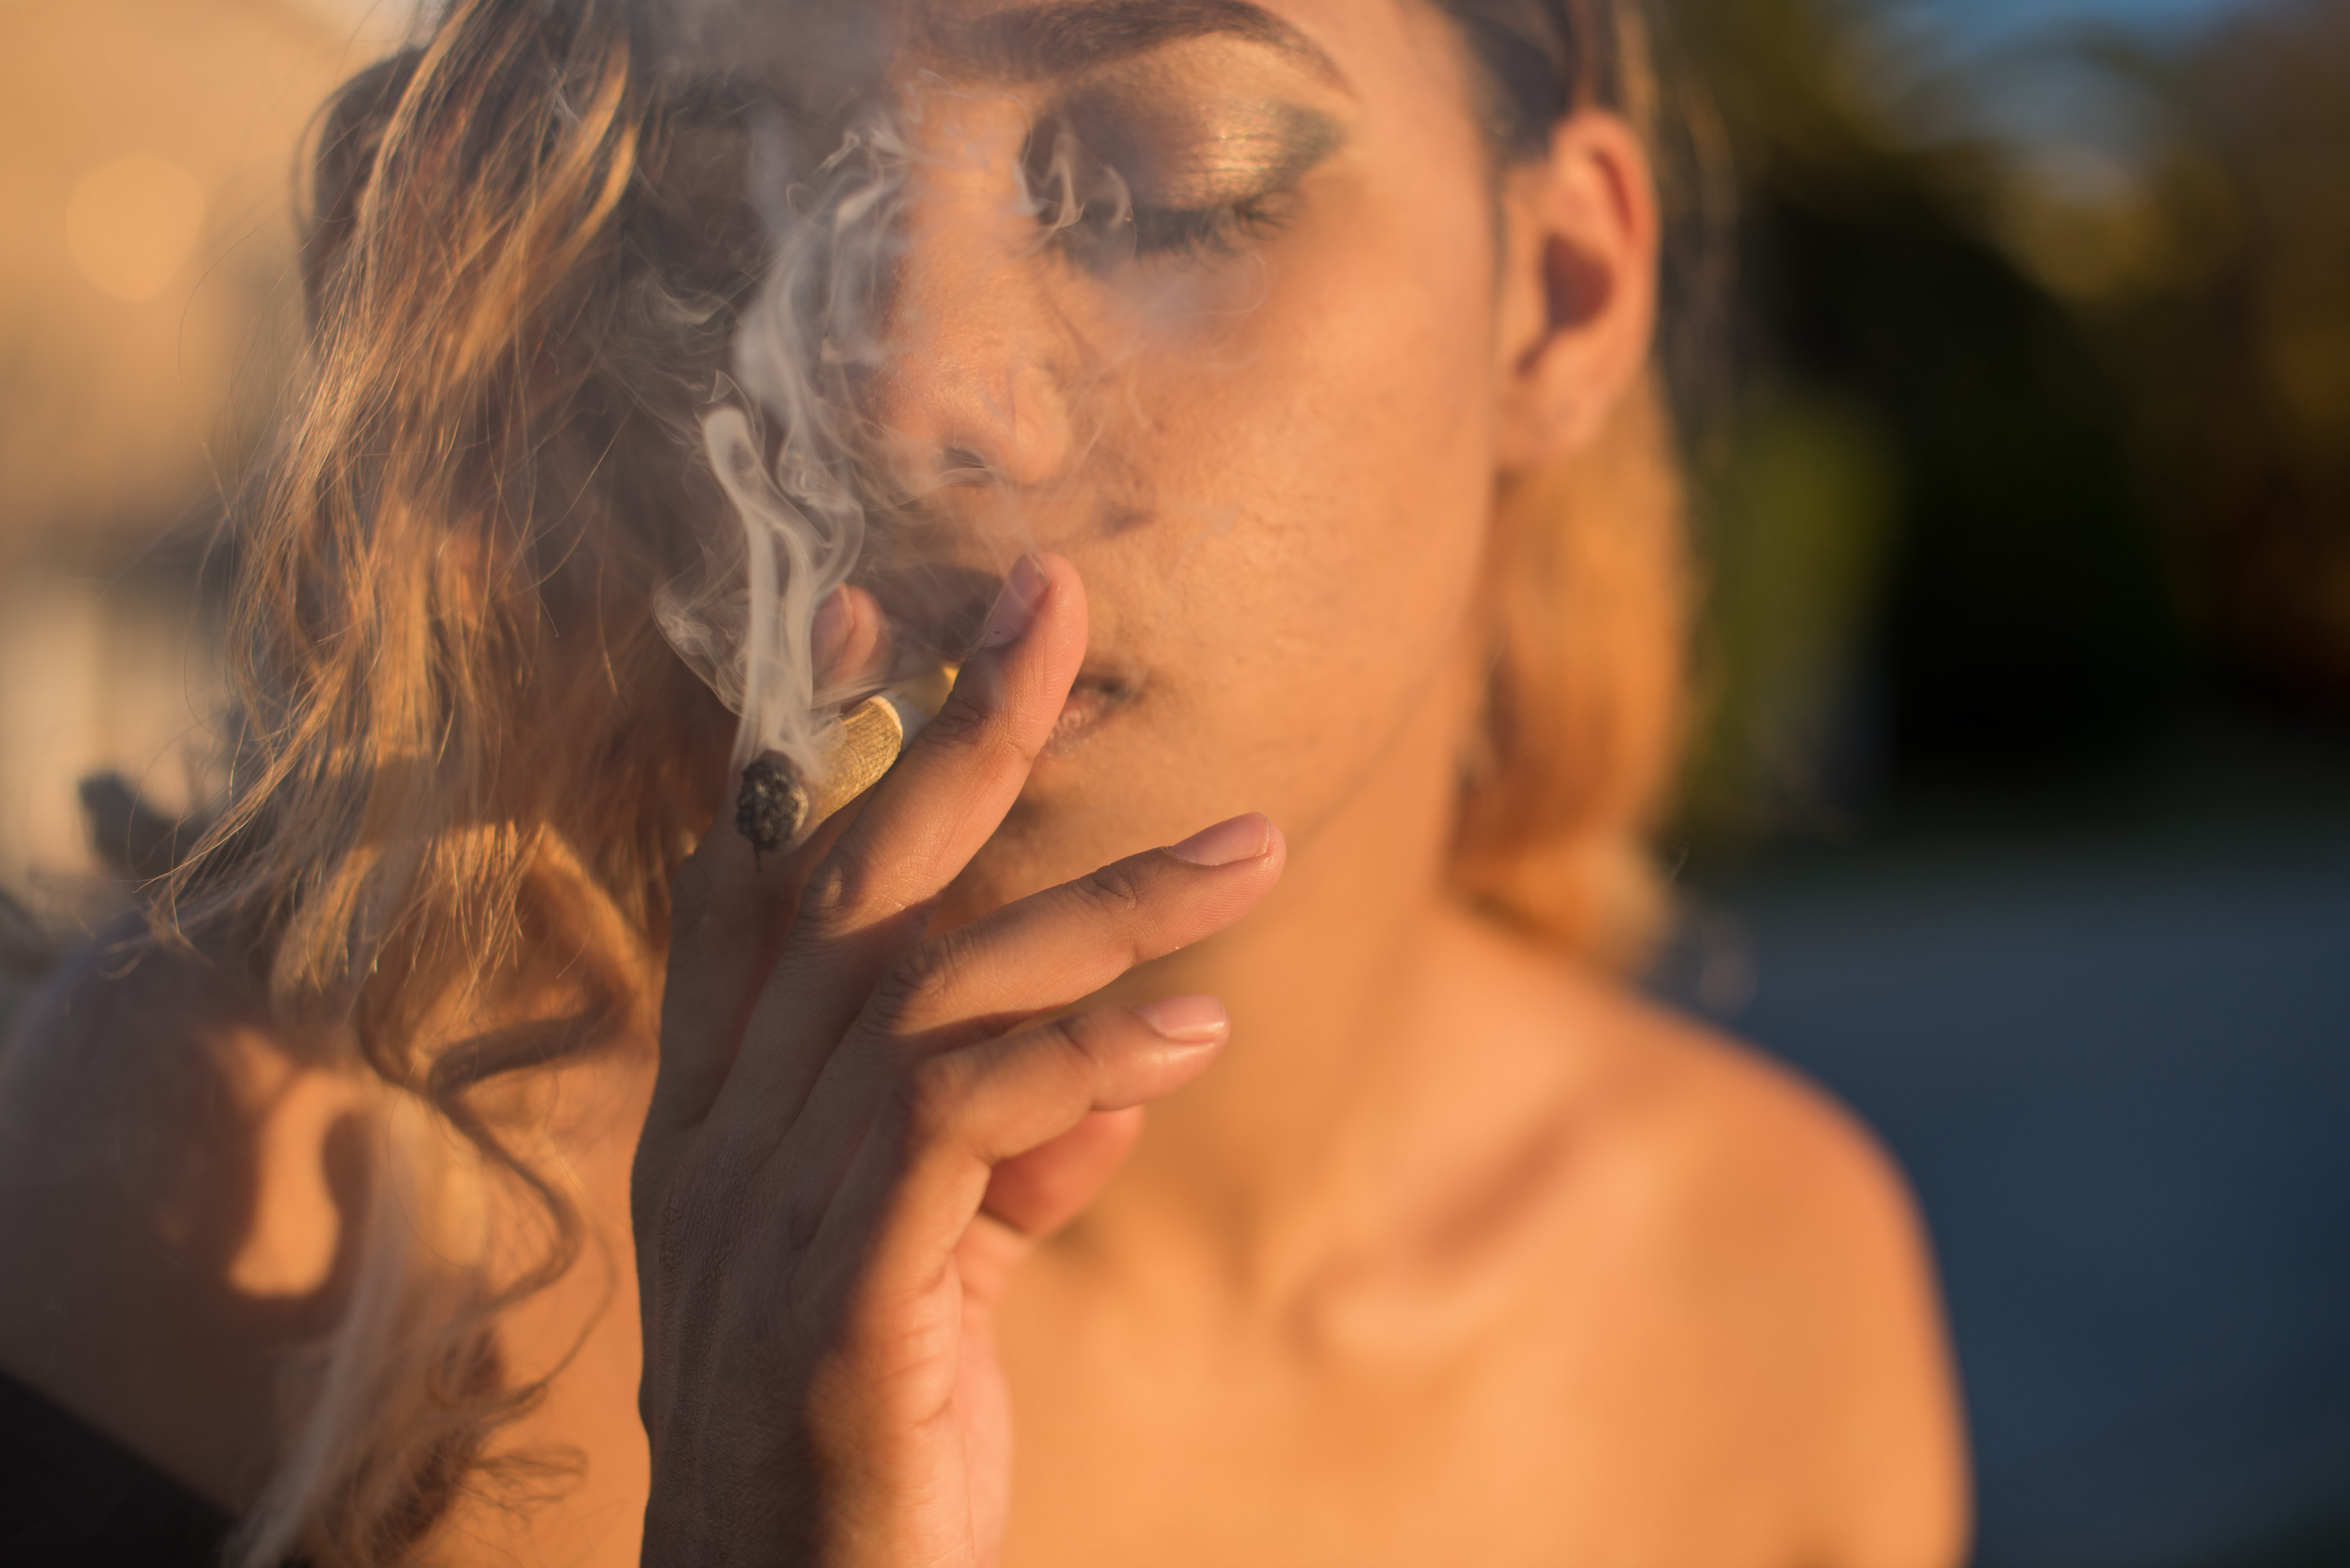 An image of a woman smoking weed